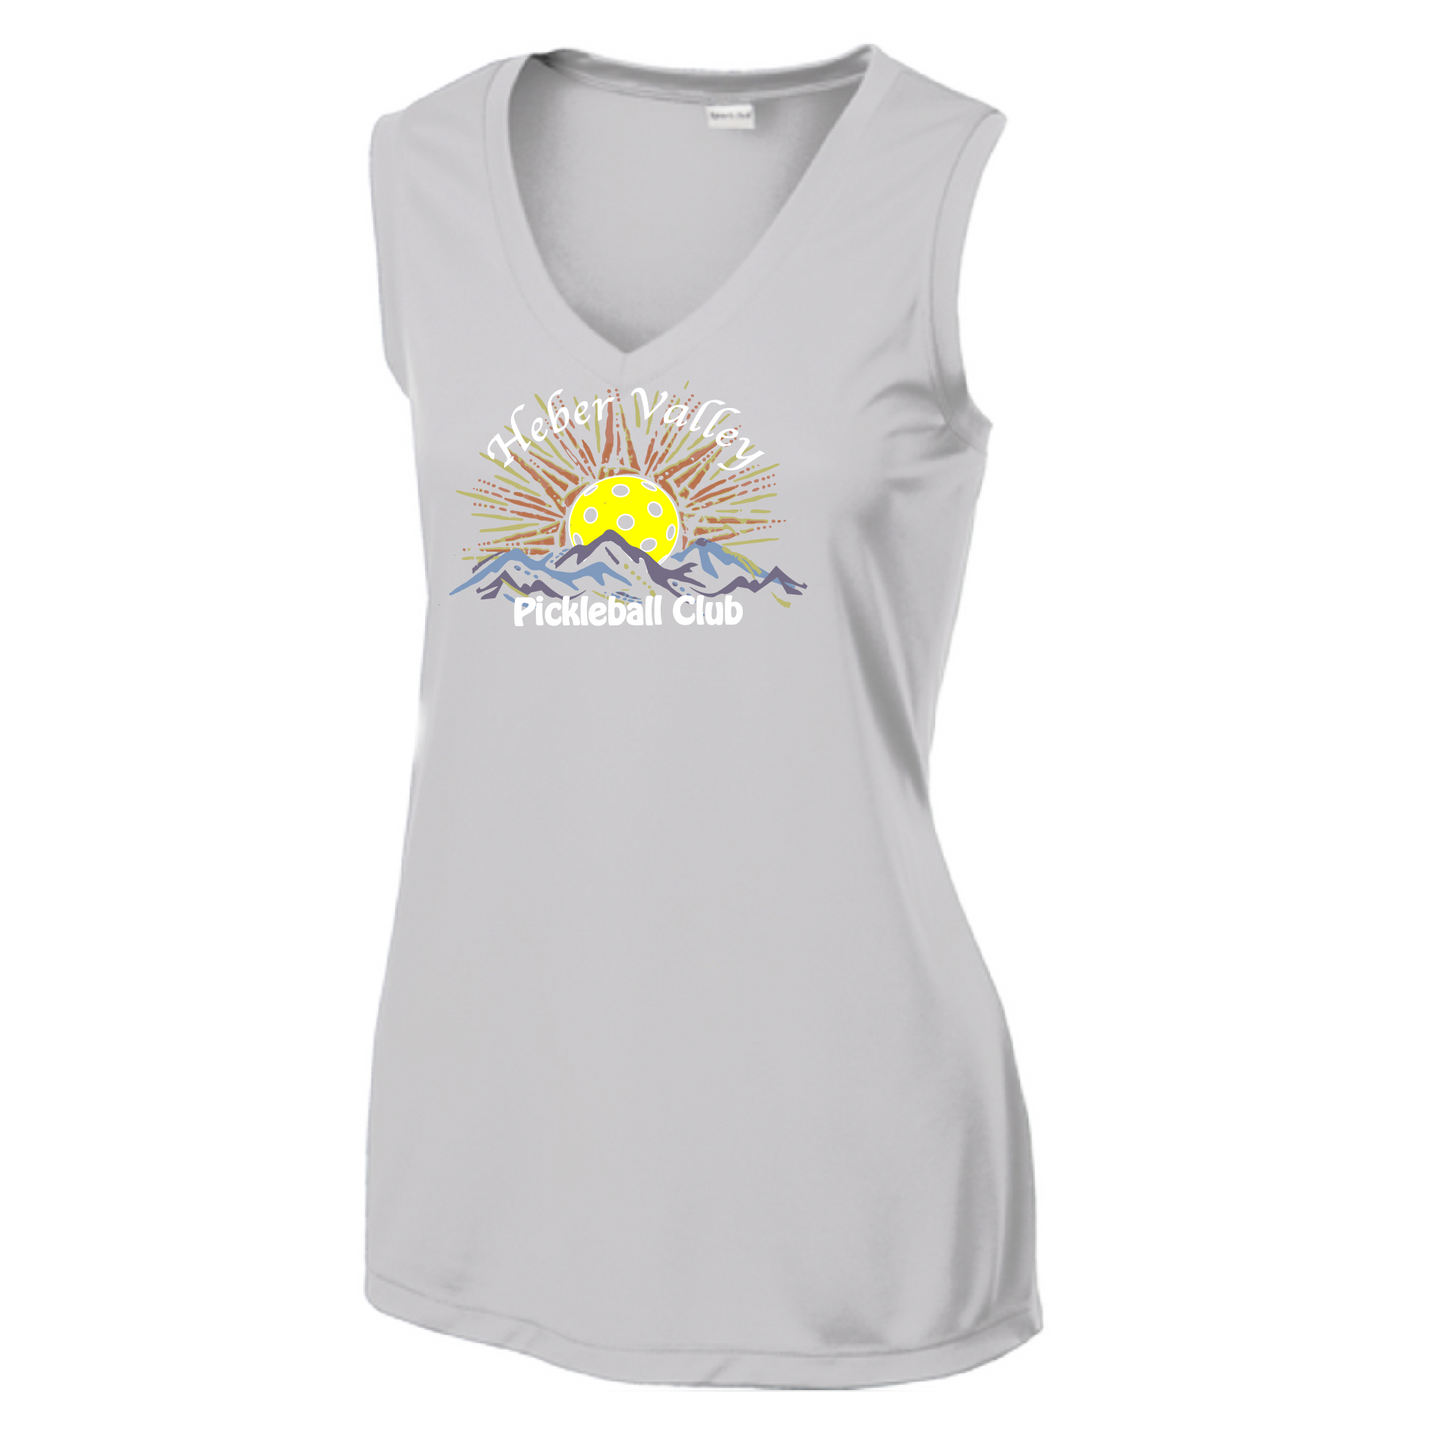 Pickleball Shirt Design: Heber Valley Pickleball Club  Women's Style: Sleeveless Tank  Turn up the volume in this Women's shirt with its perfect mix of softness and attitude. Material is ultra-comfortable with moisture wicking properties and tri-blend softness. PosiCharge technology locks in color. Highly breathable and lightweight.